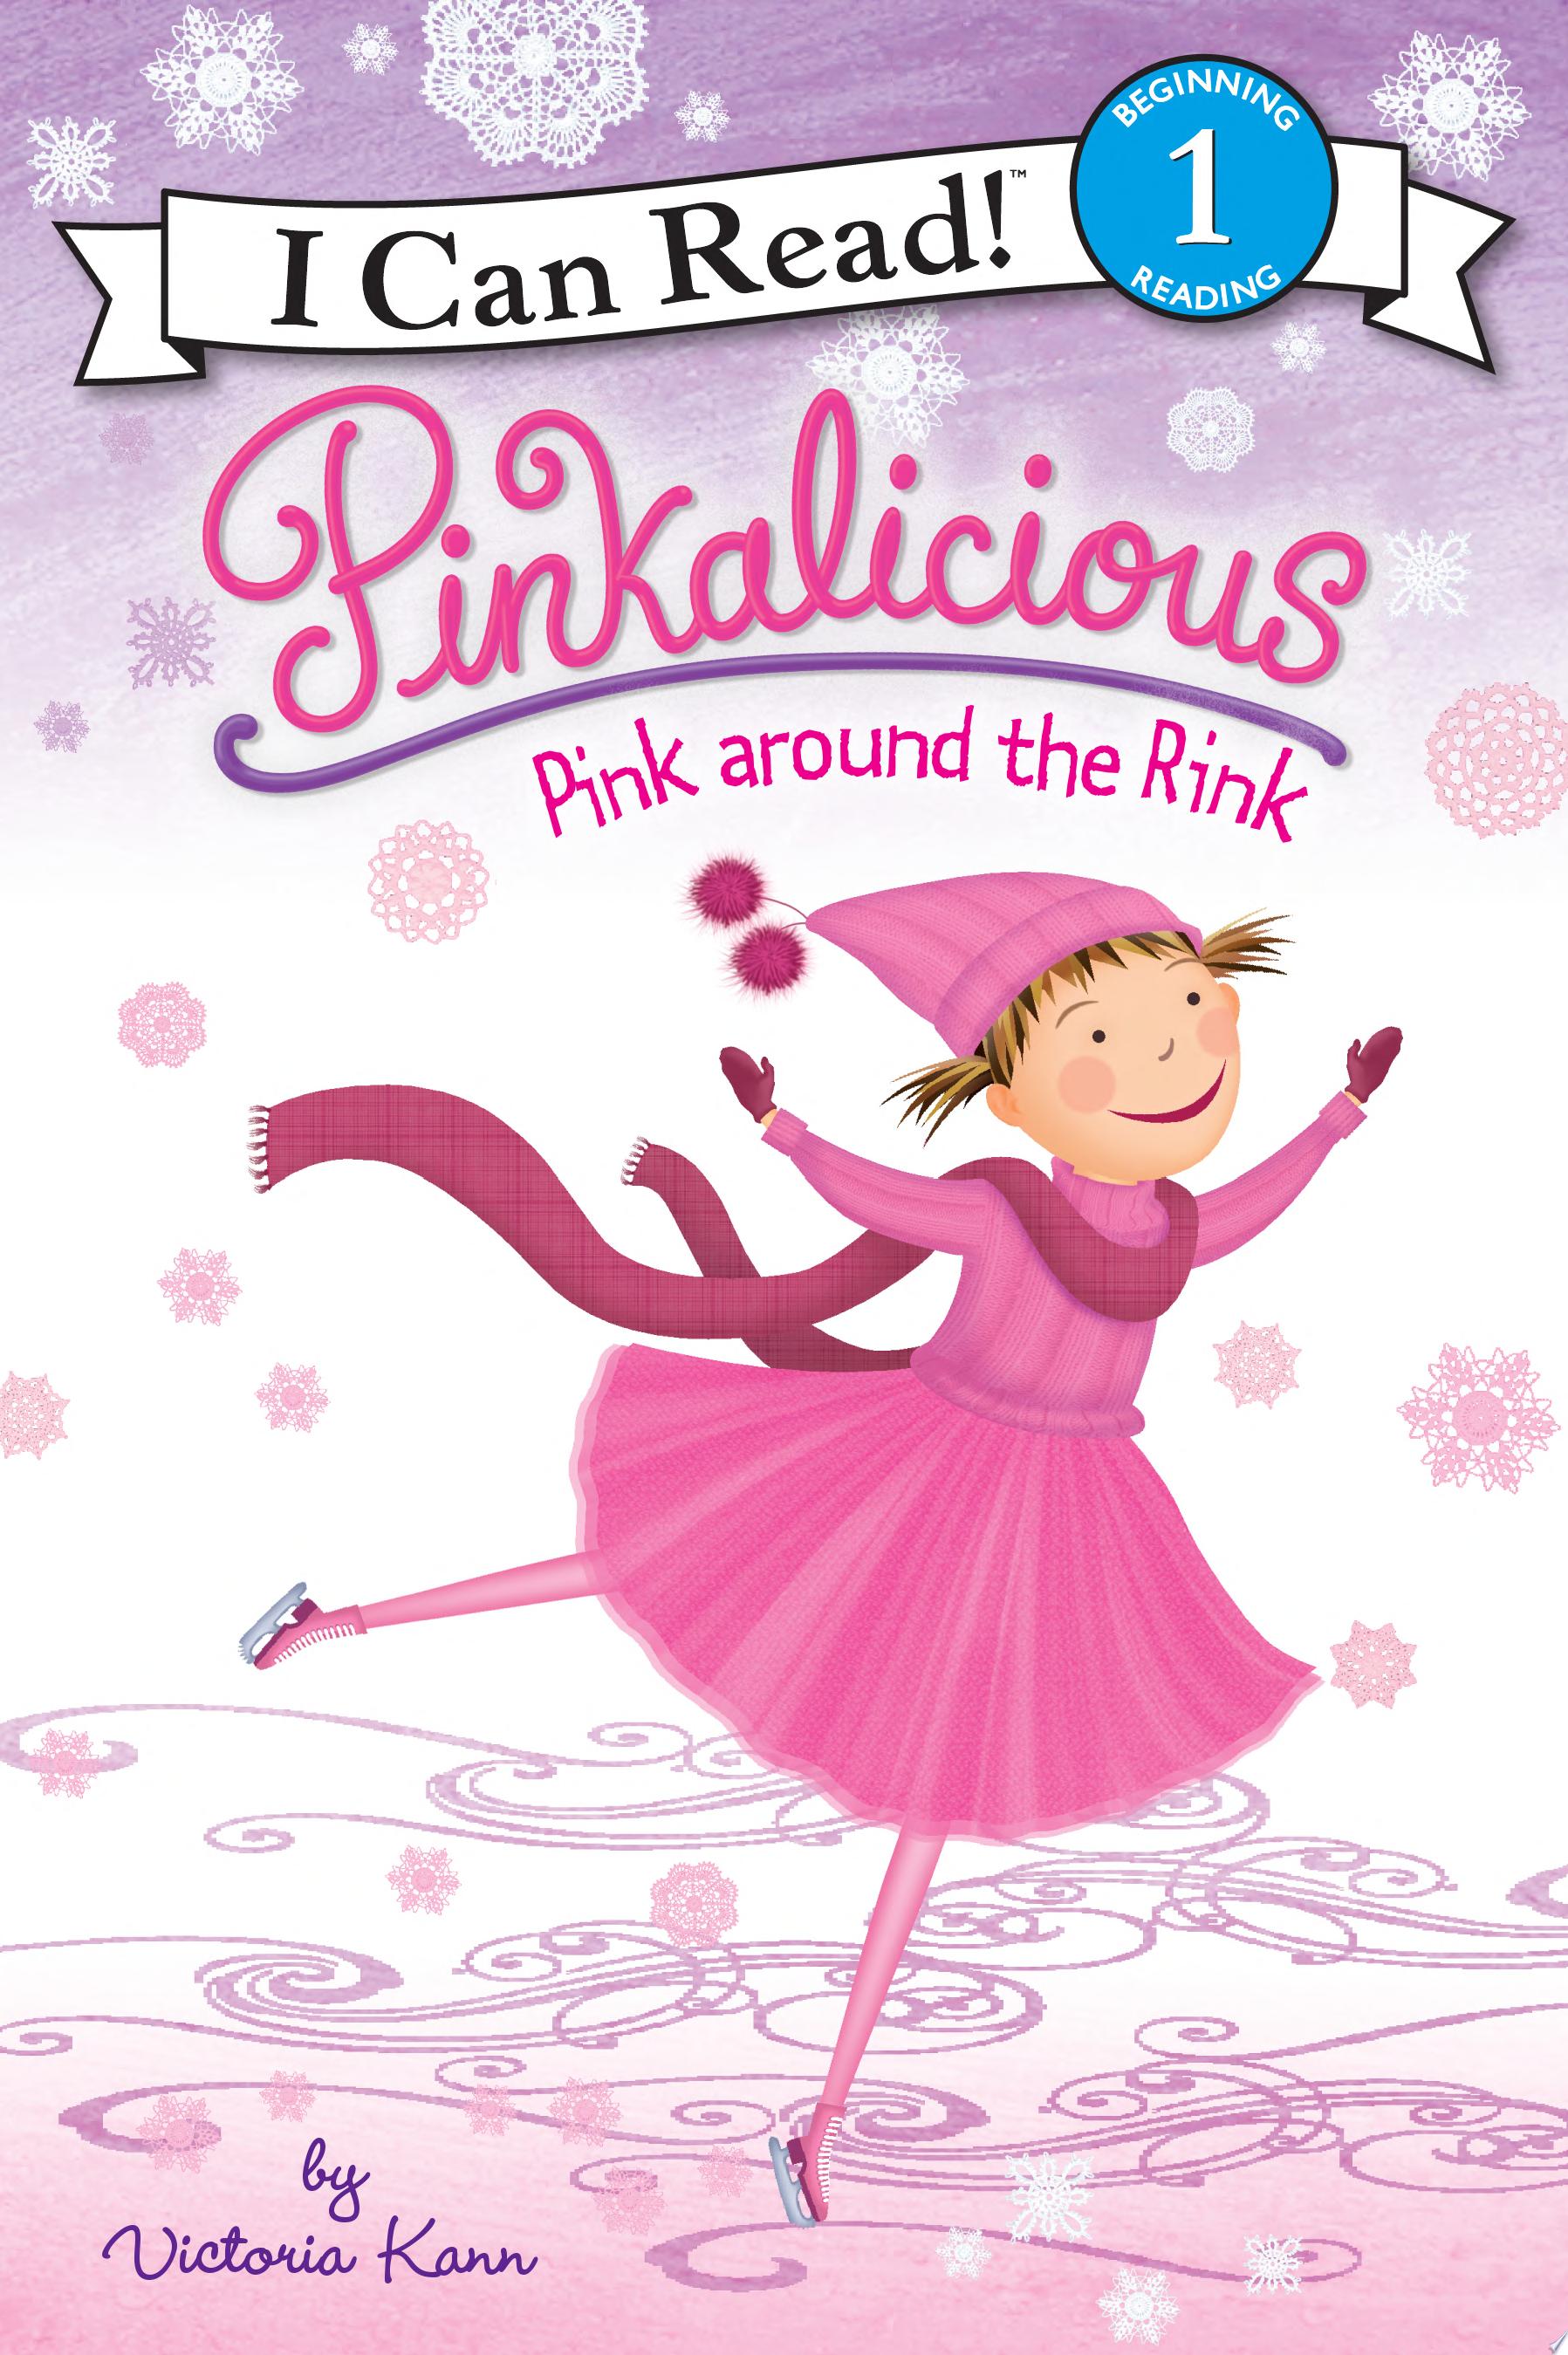 Image for "Pinkalicious: Pink around the Rink"